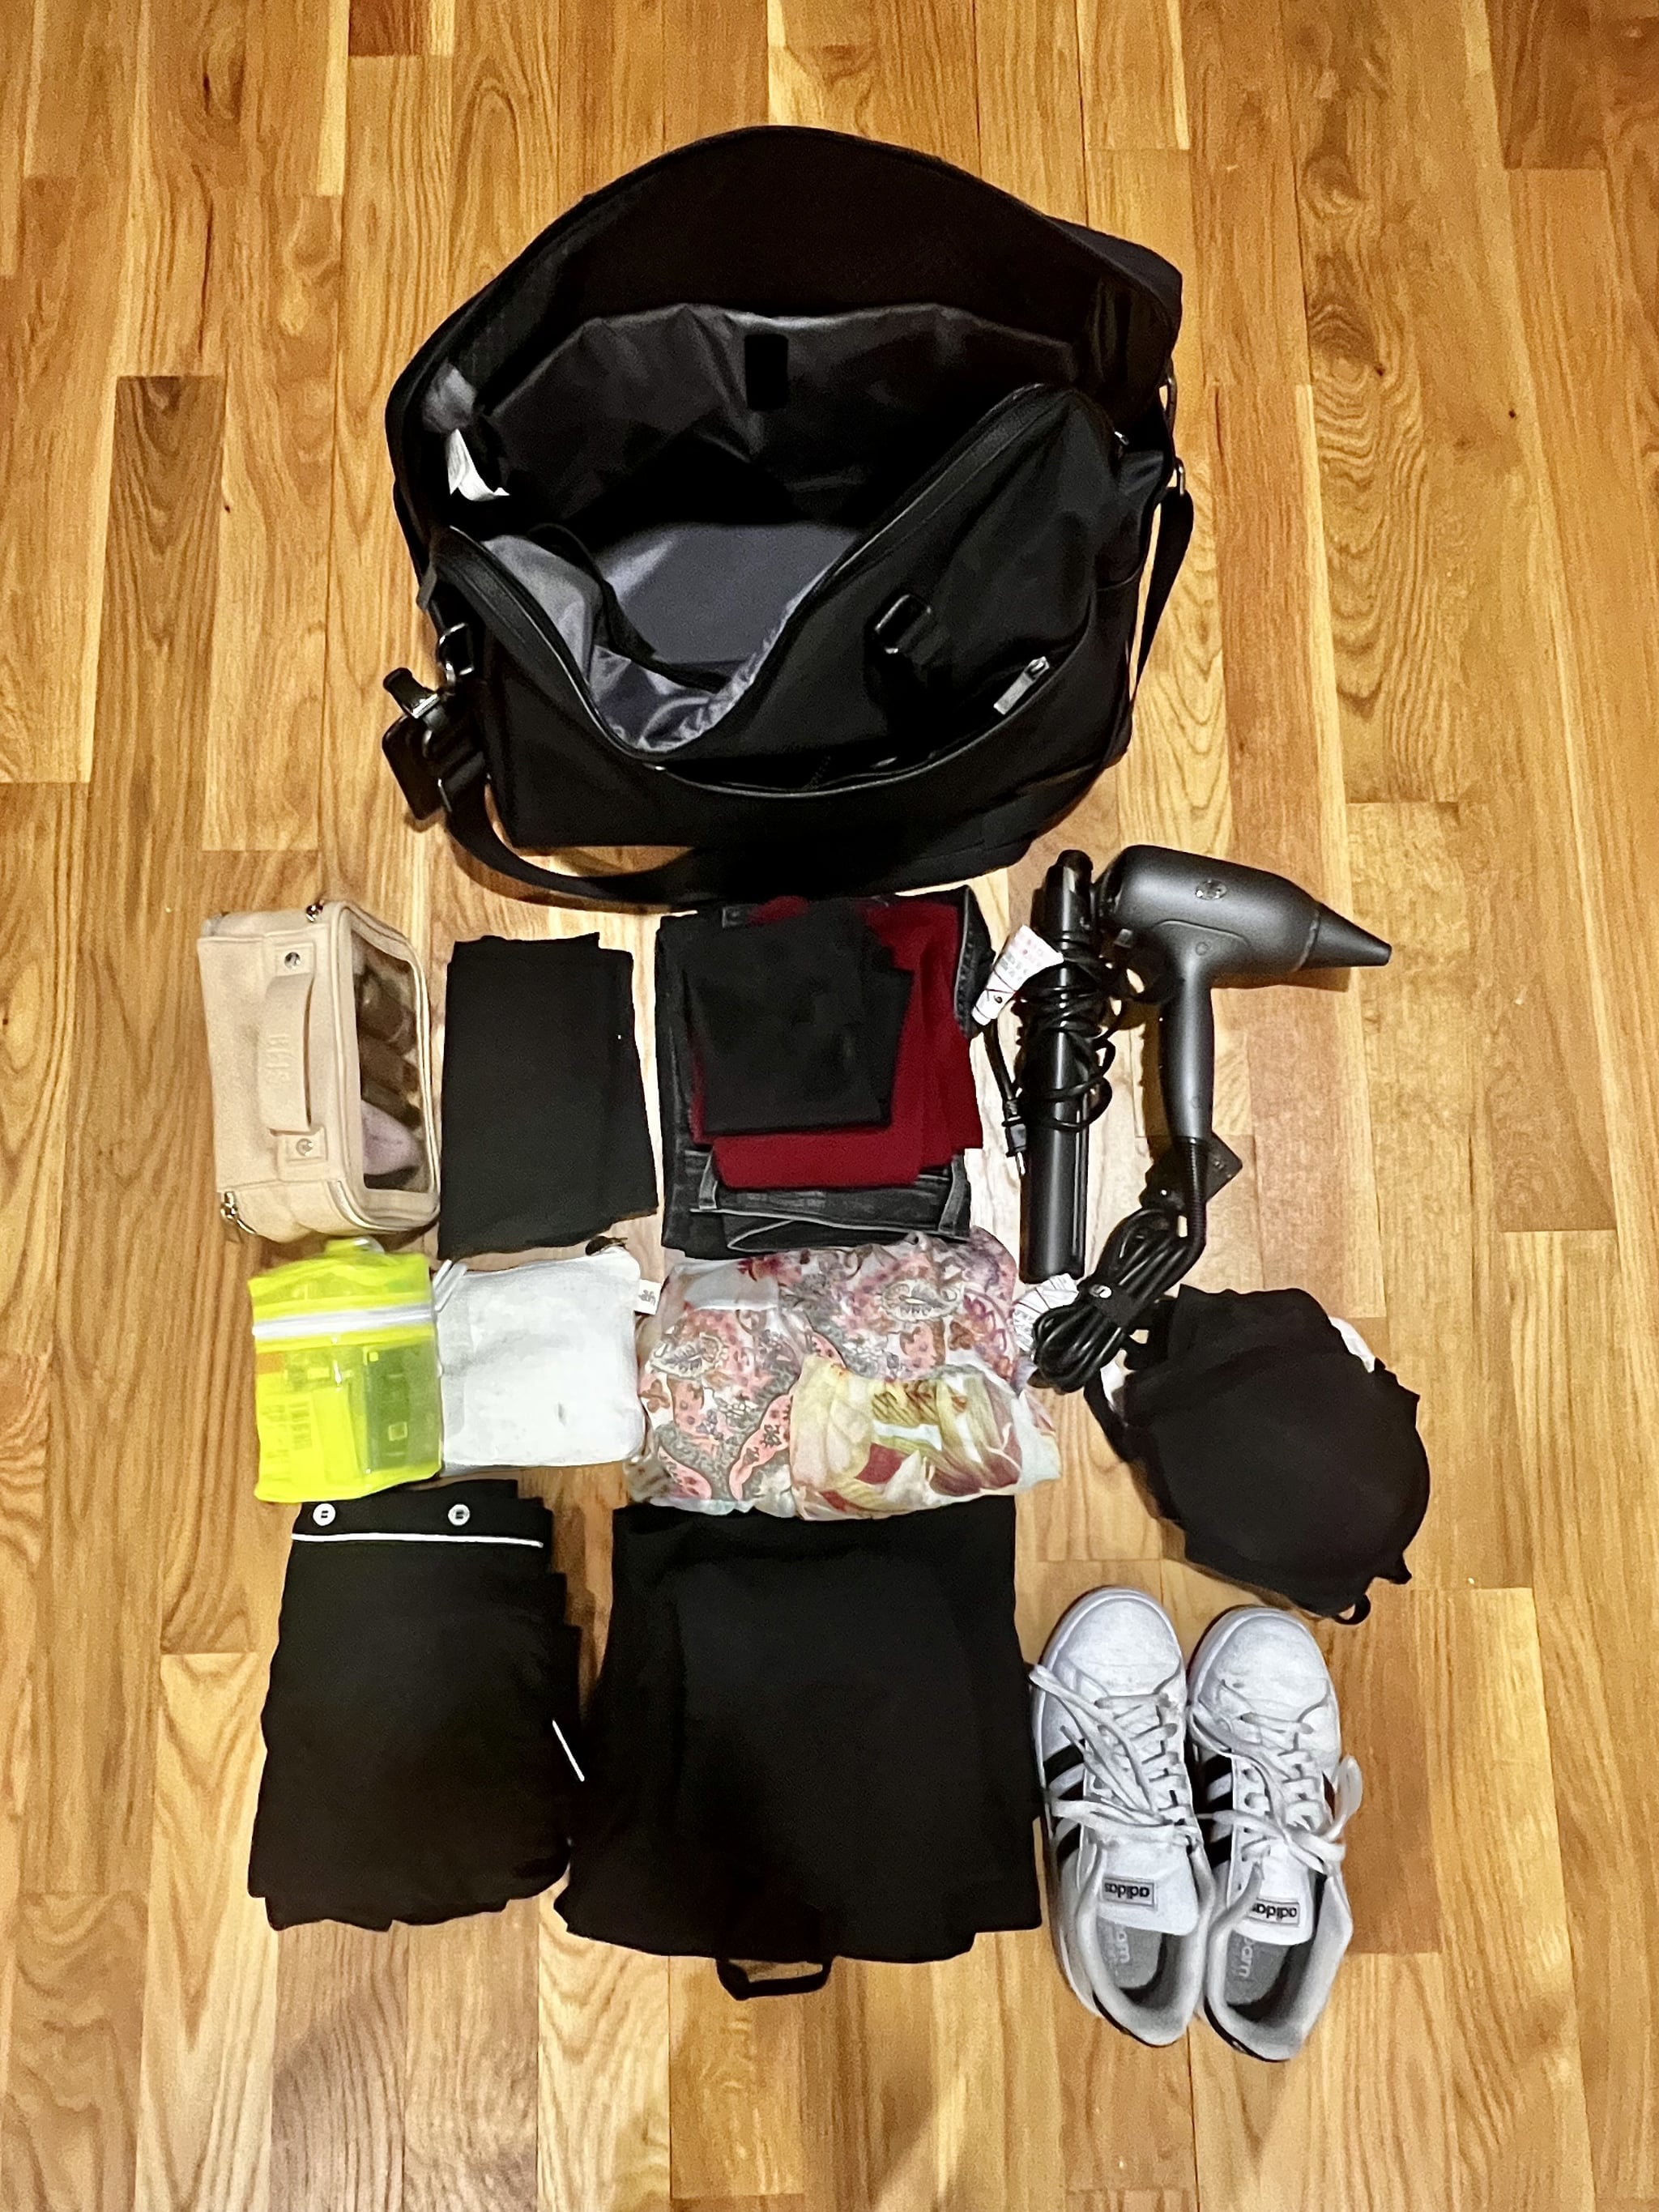 The Open Story Weekender Bag packed with travel essentials including sneakers, makeup bag, skin-care kit, and toiletries pouch, a pair of jeans, a sweater, my undergarments, a travel hair dryer, and a straightener, a dress, a jumpsuit, a pair of pajamas, a pair of leggings, and two tops.